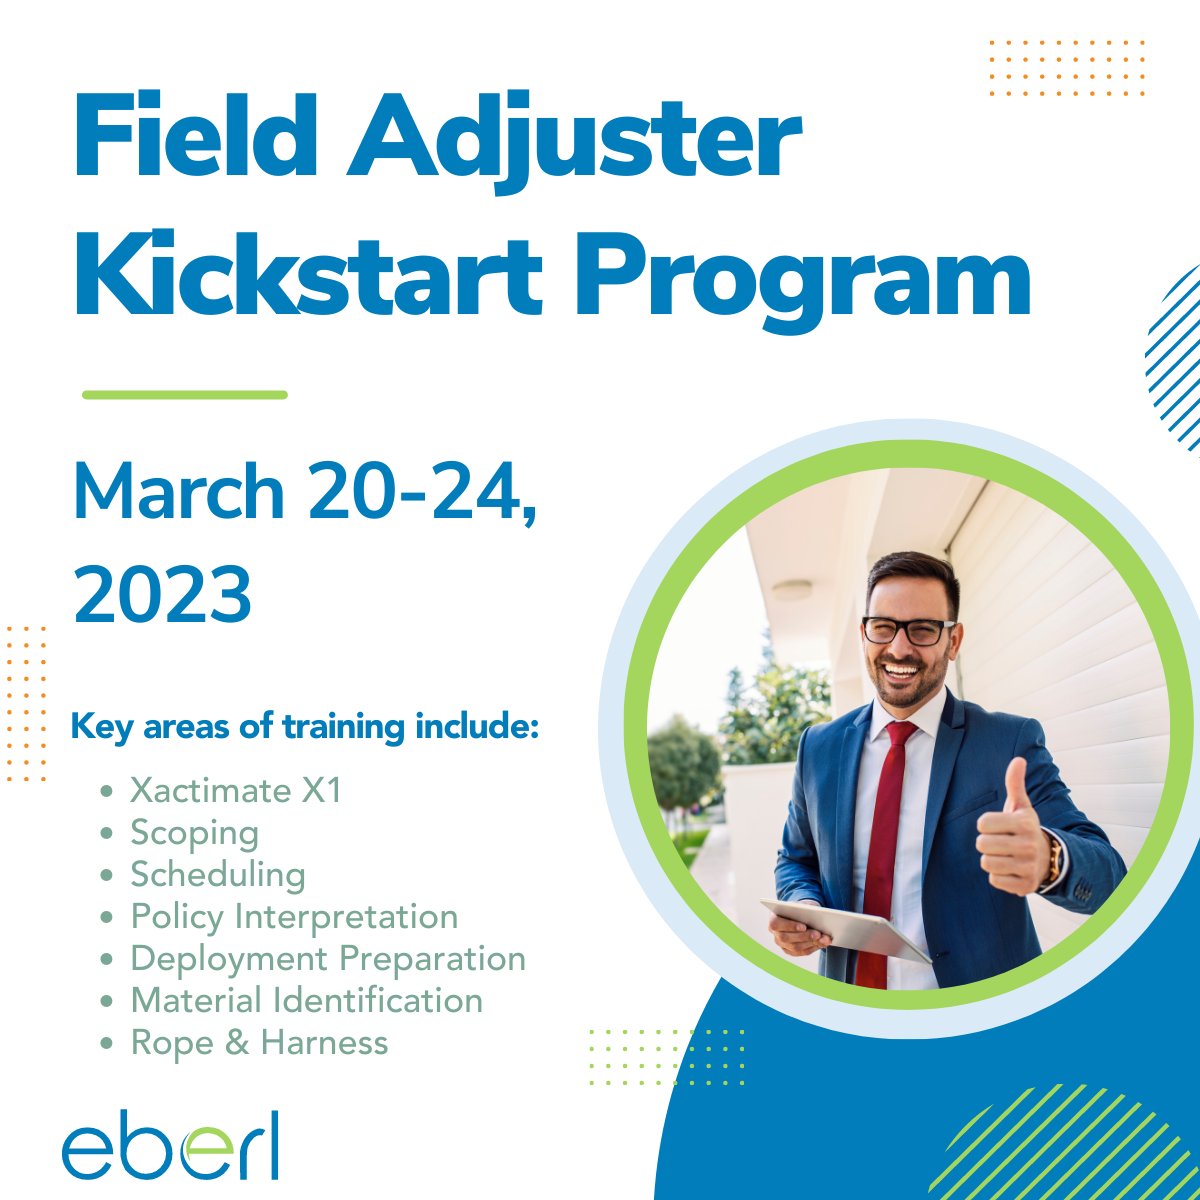 Kickstart your adjusting career with CATI! Spring storm season means opportunities for newer #adjusters with the right skill sets to deploy. To enroll in an upcoming session, please log into your Eberl dashboard at bit.ly/3BUksrV

#insuranceadjuster #insuranceindustry